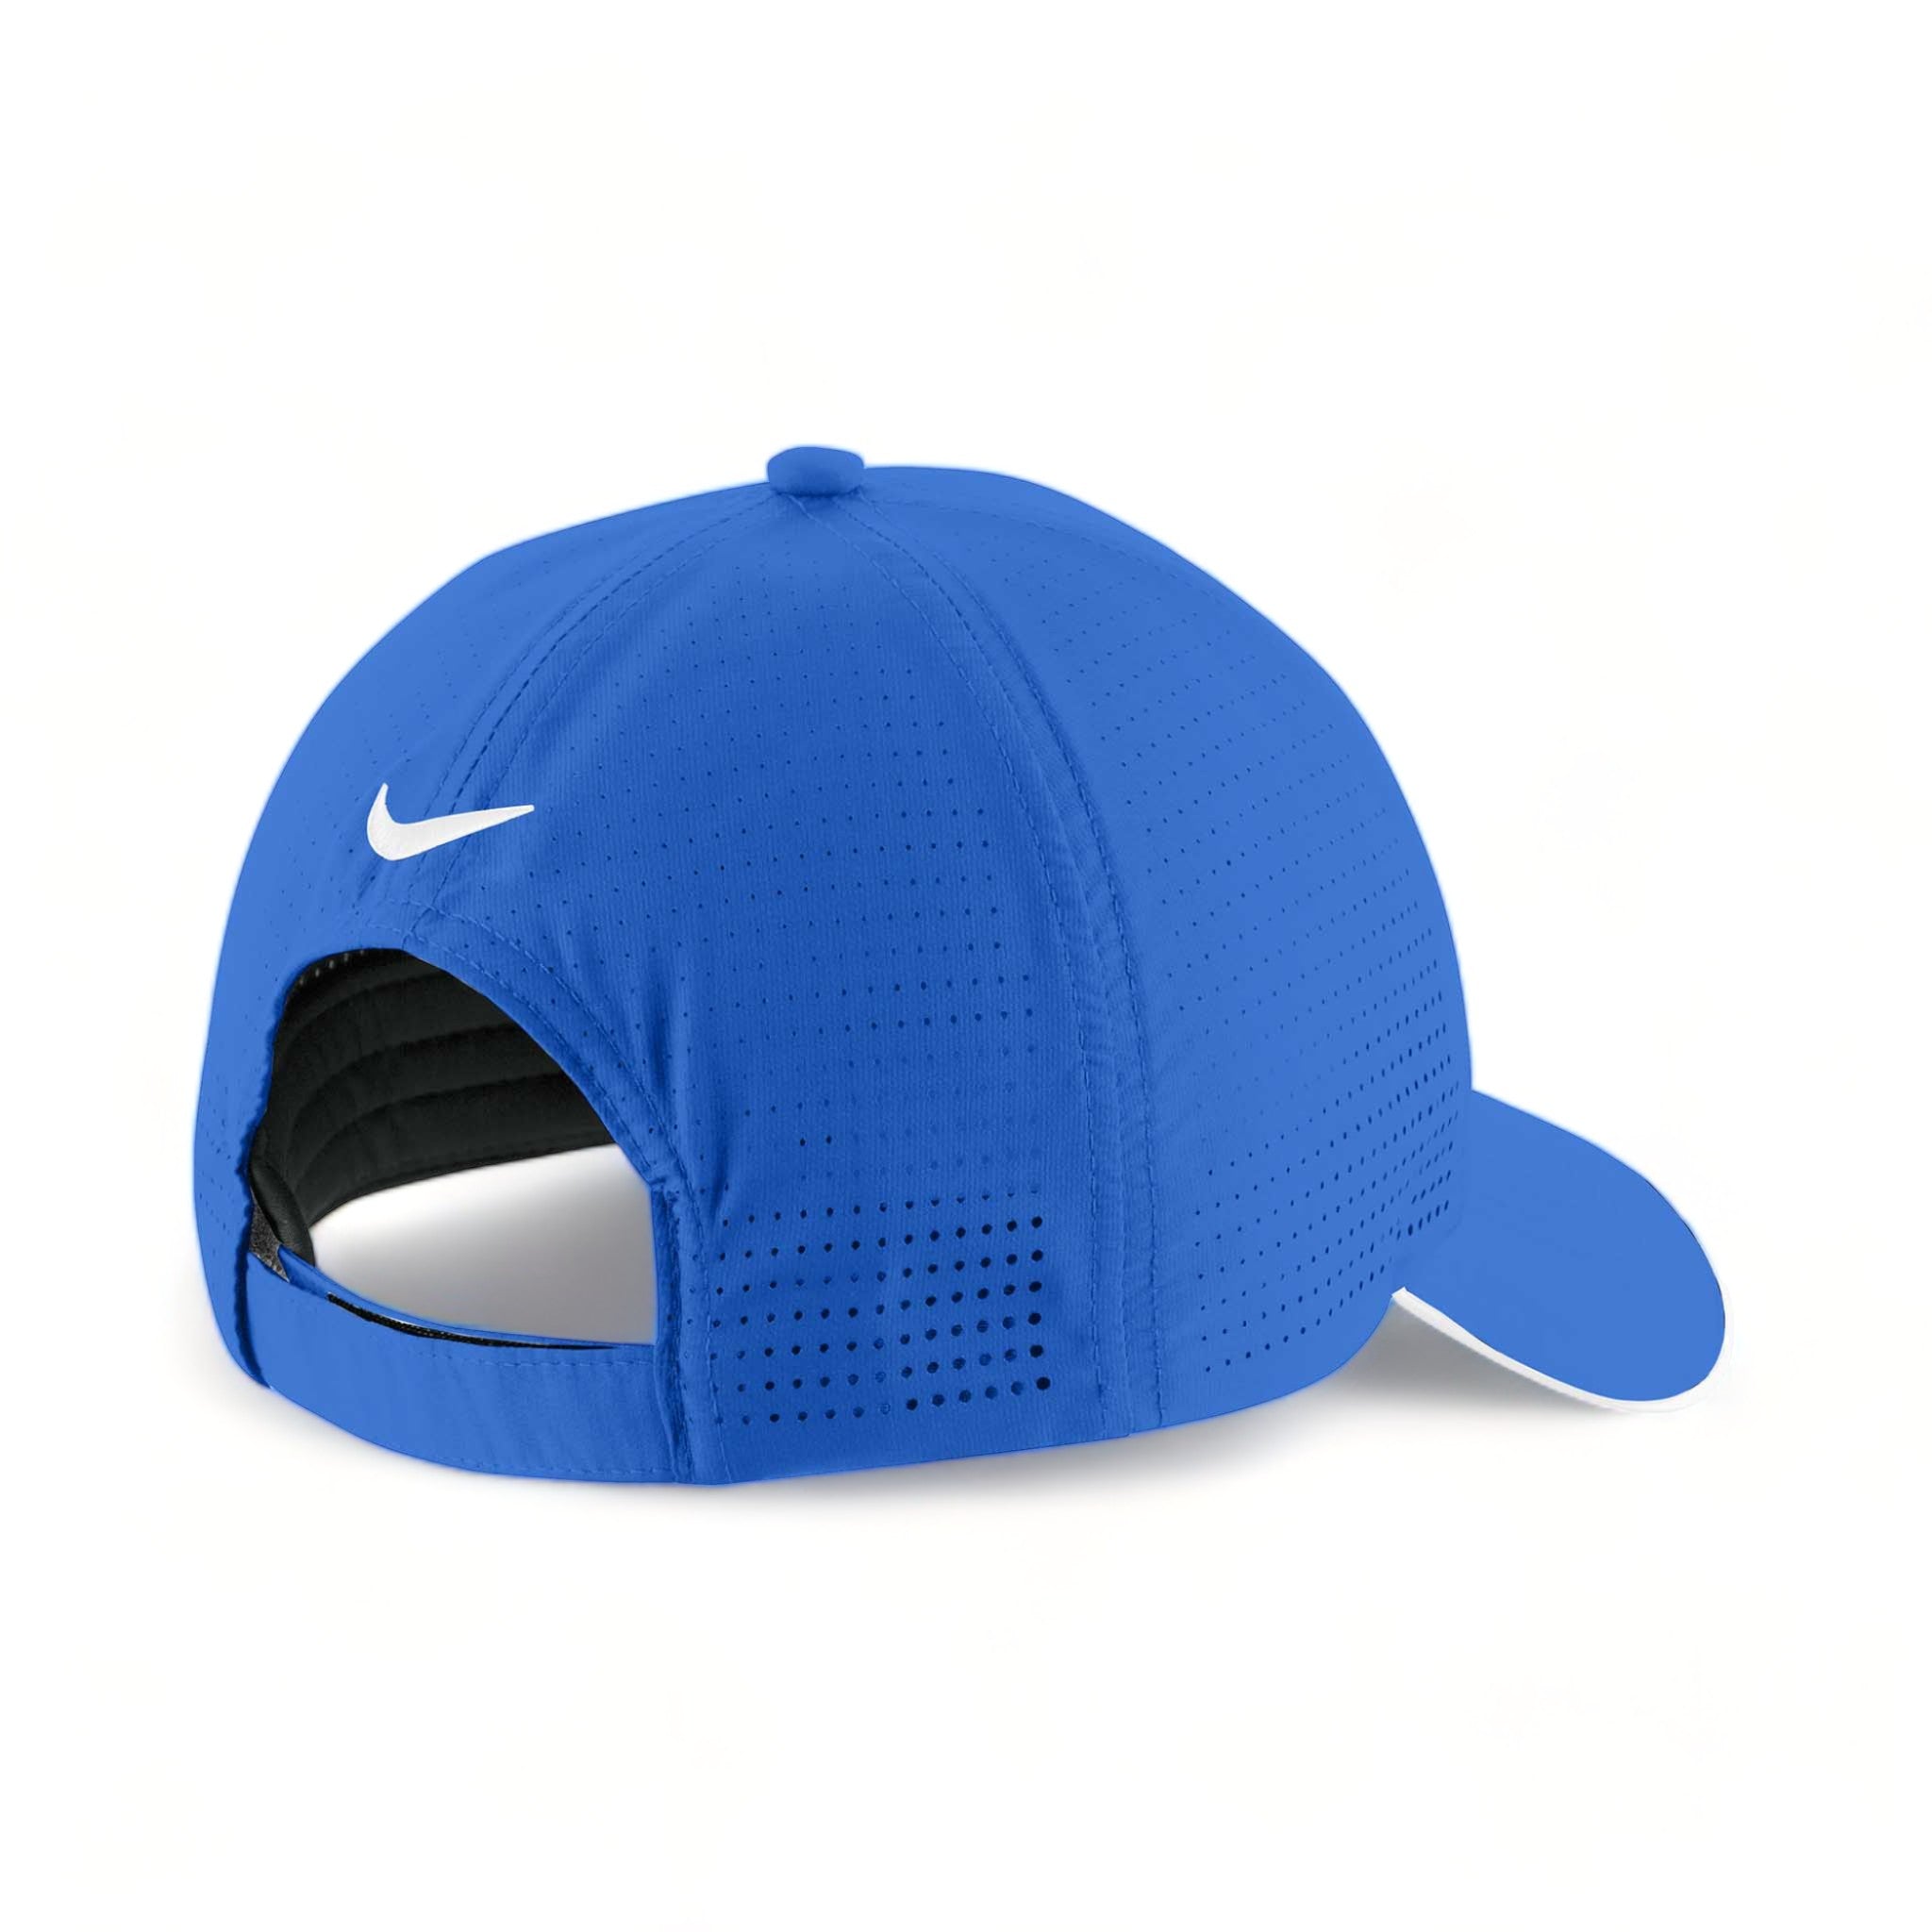 Back view of Nike NKFB6445 custom hat in game royal and white